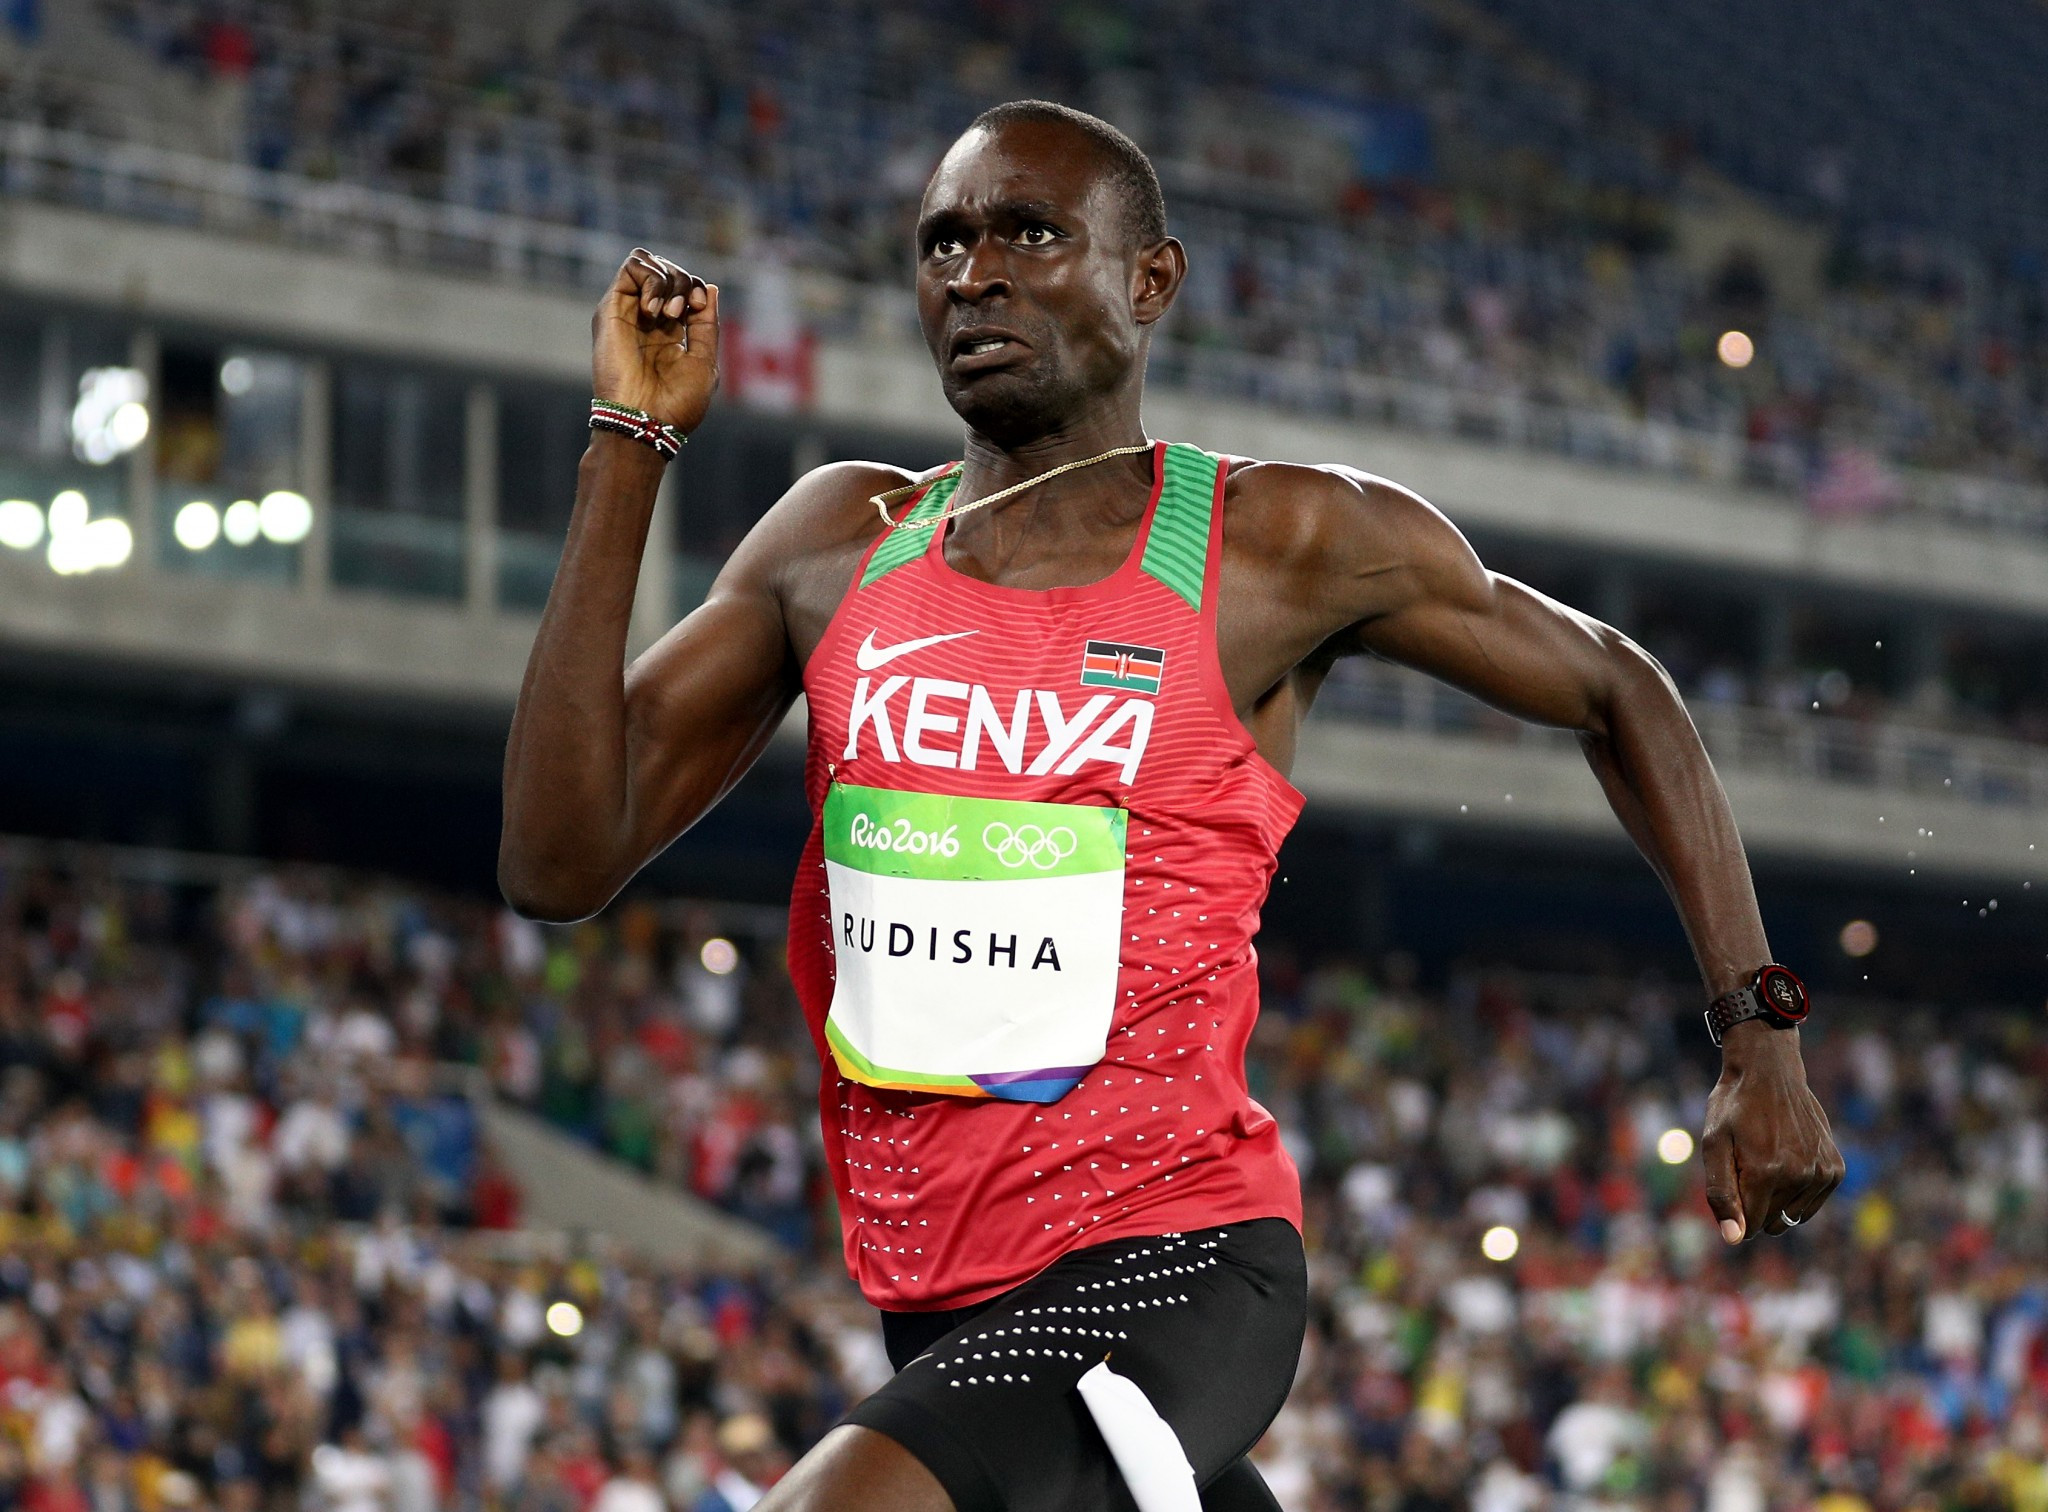 David Rudisha, pictured retaining his Olympic 800m title in Rio, will not defend his world title in London due to injury ©Getty Images